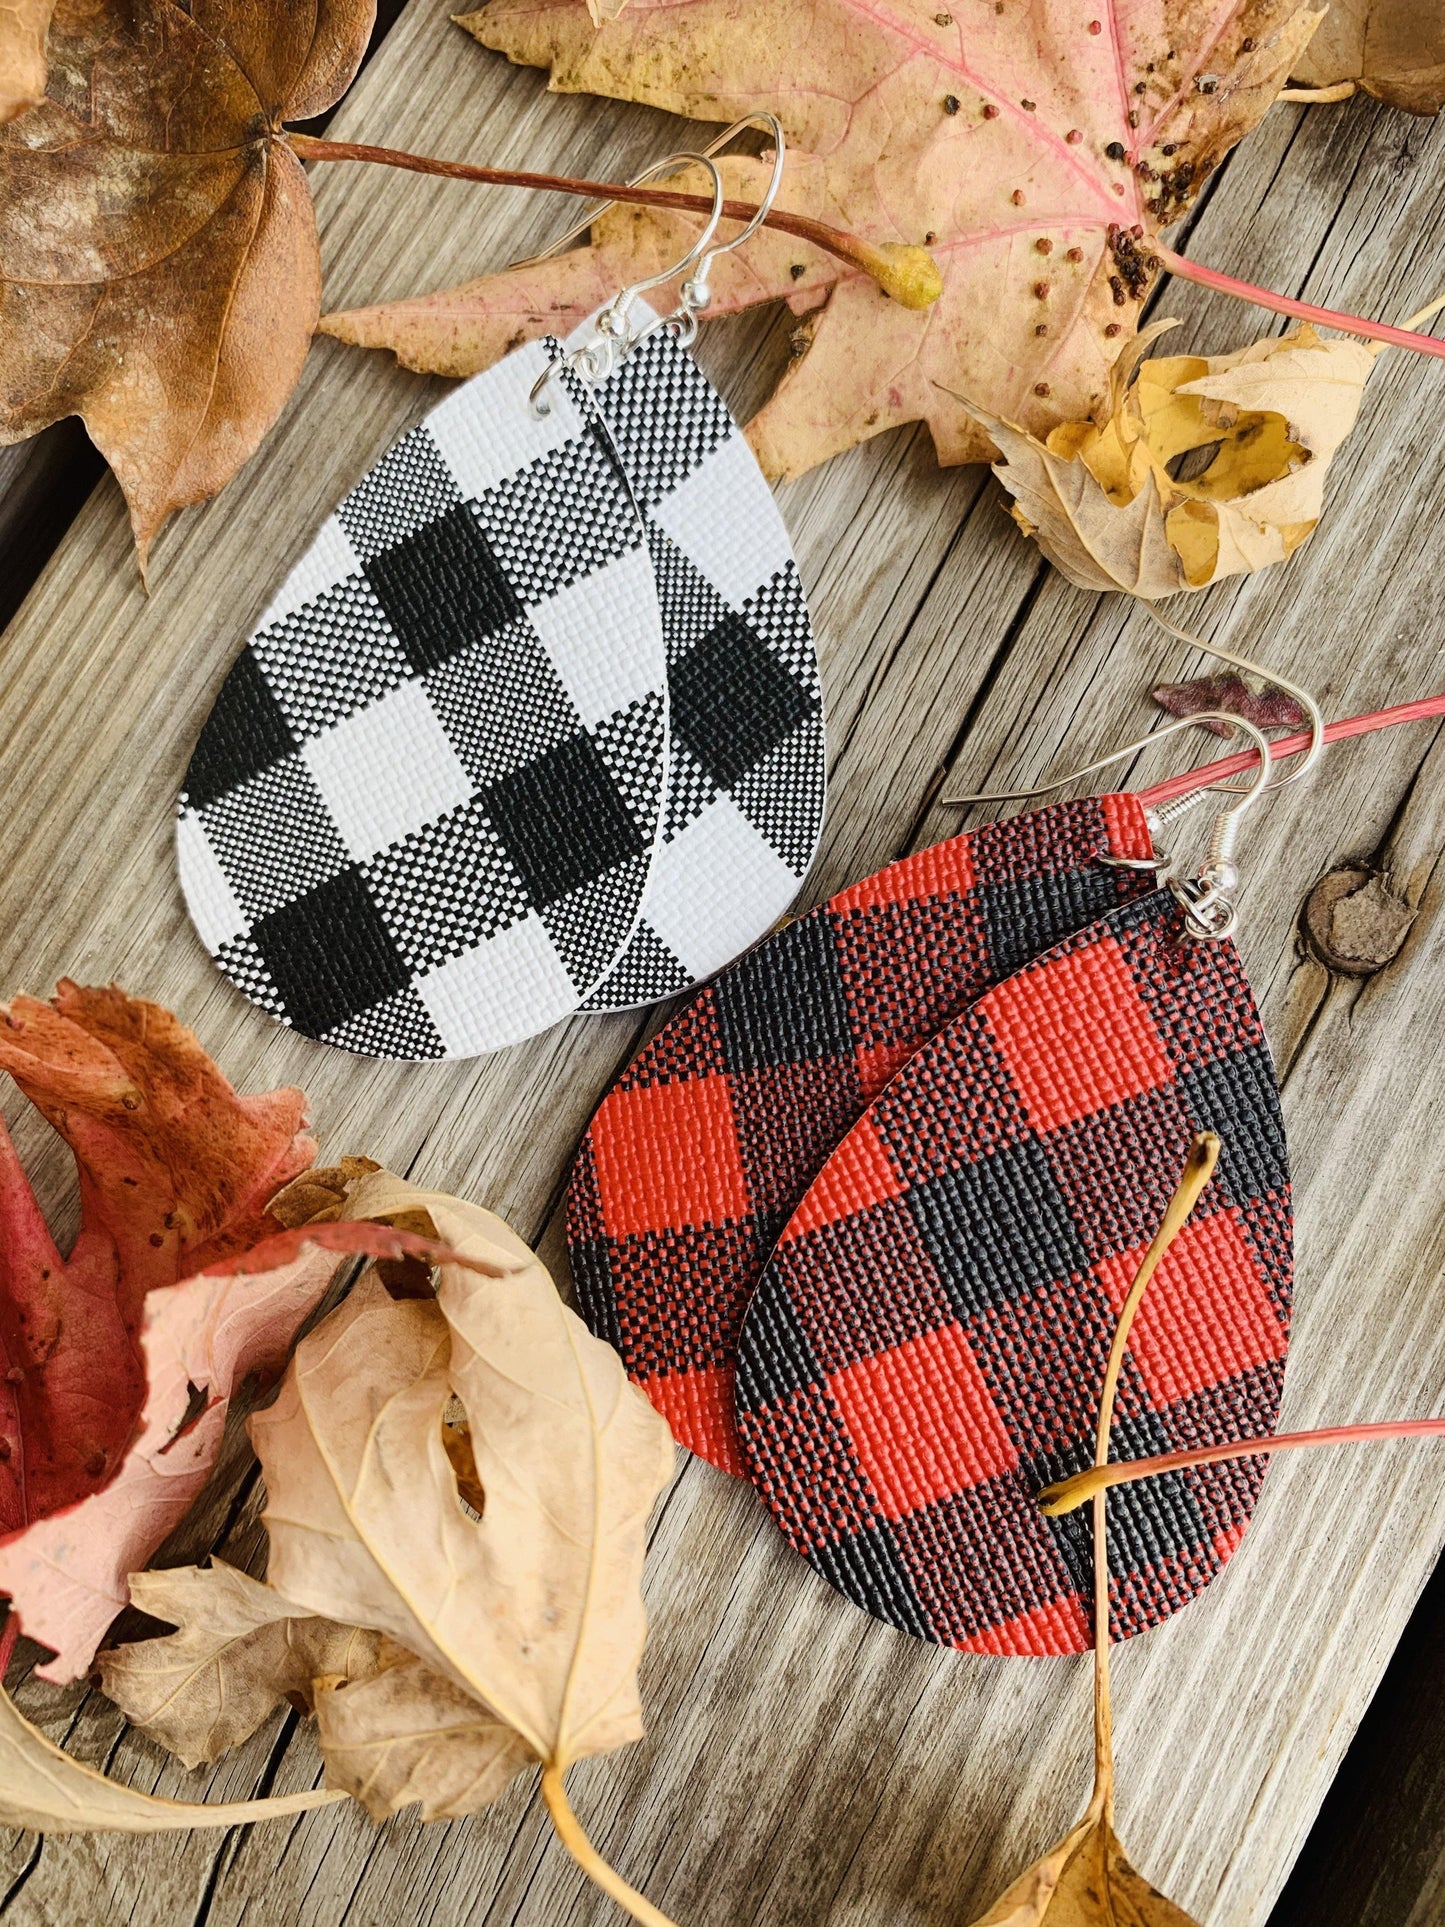 Earrings • Buffalo plaid • White/black • Red/black • Wholesale orders welcome. - Stacy's Pink Martini Boutique